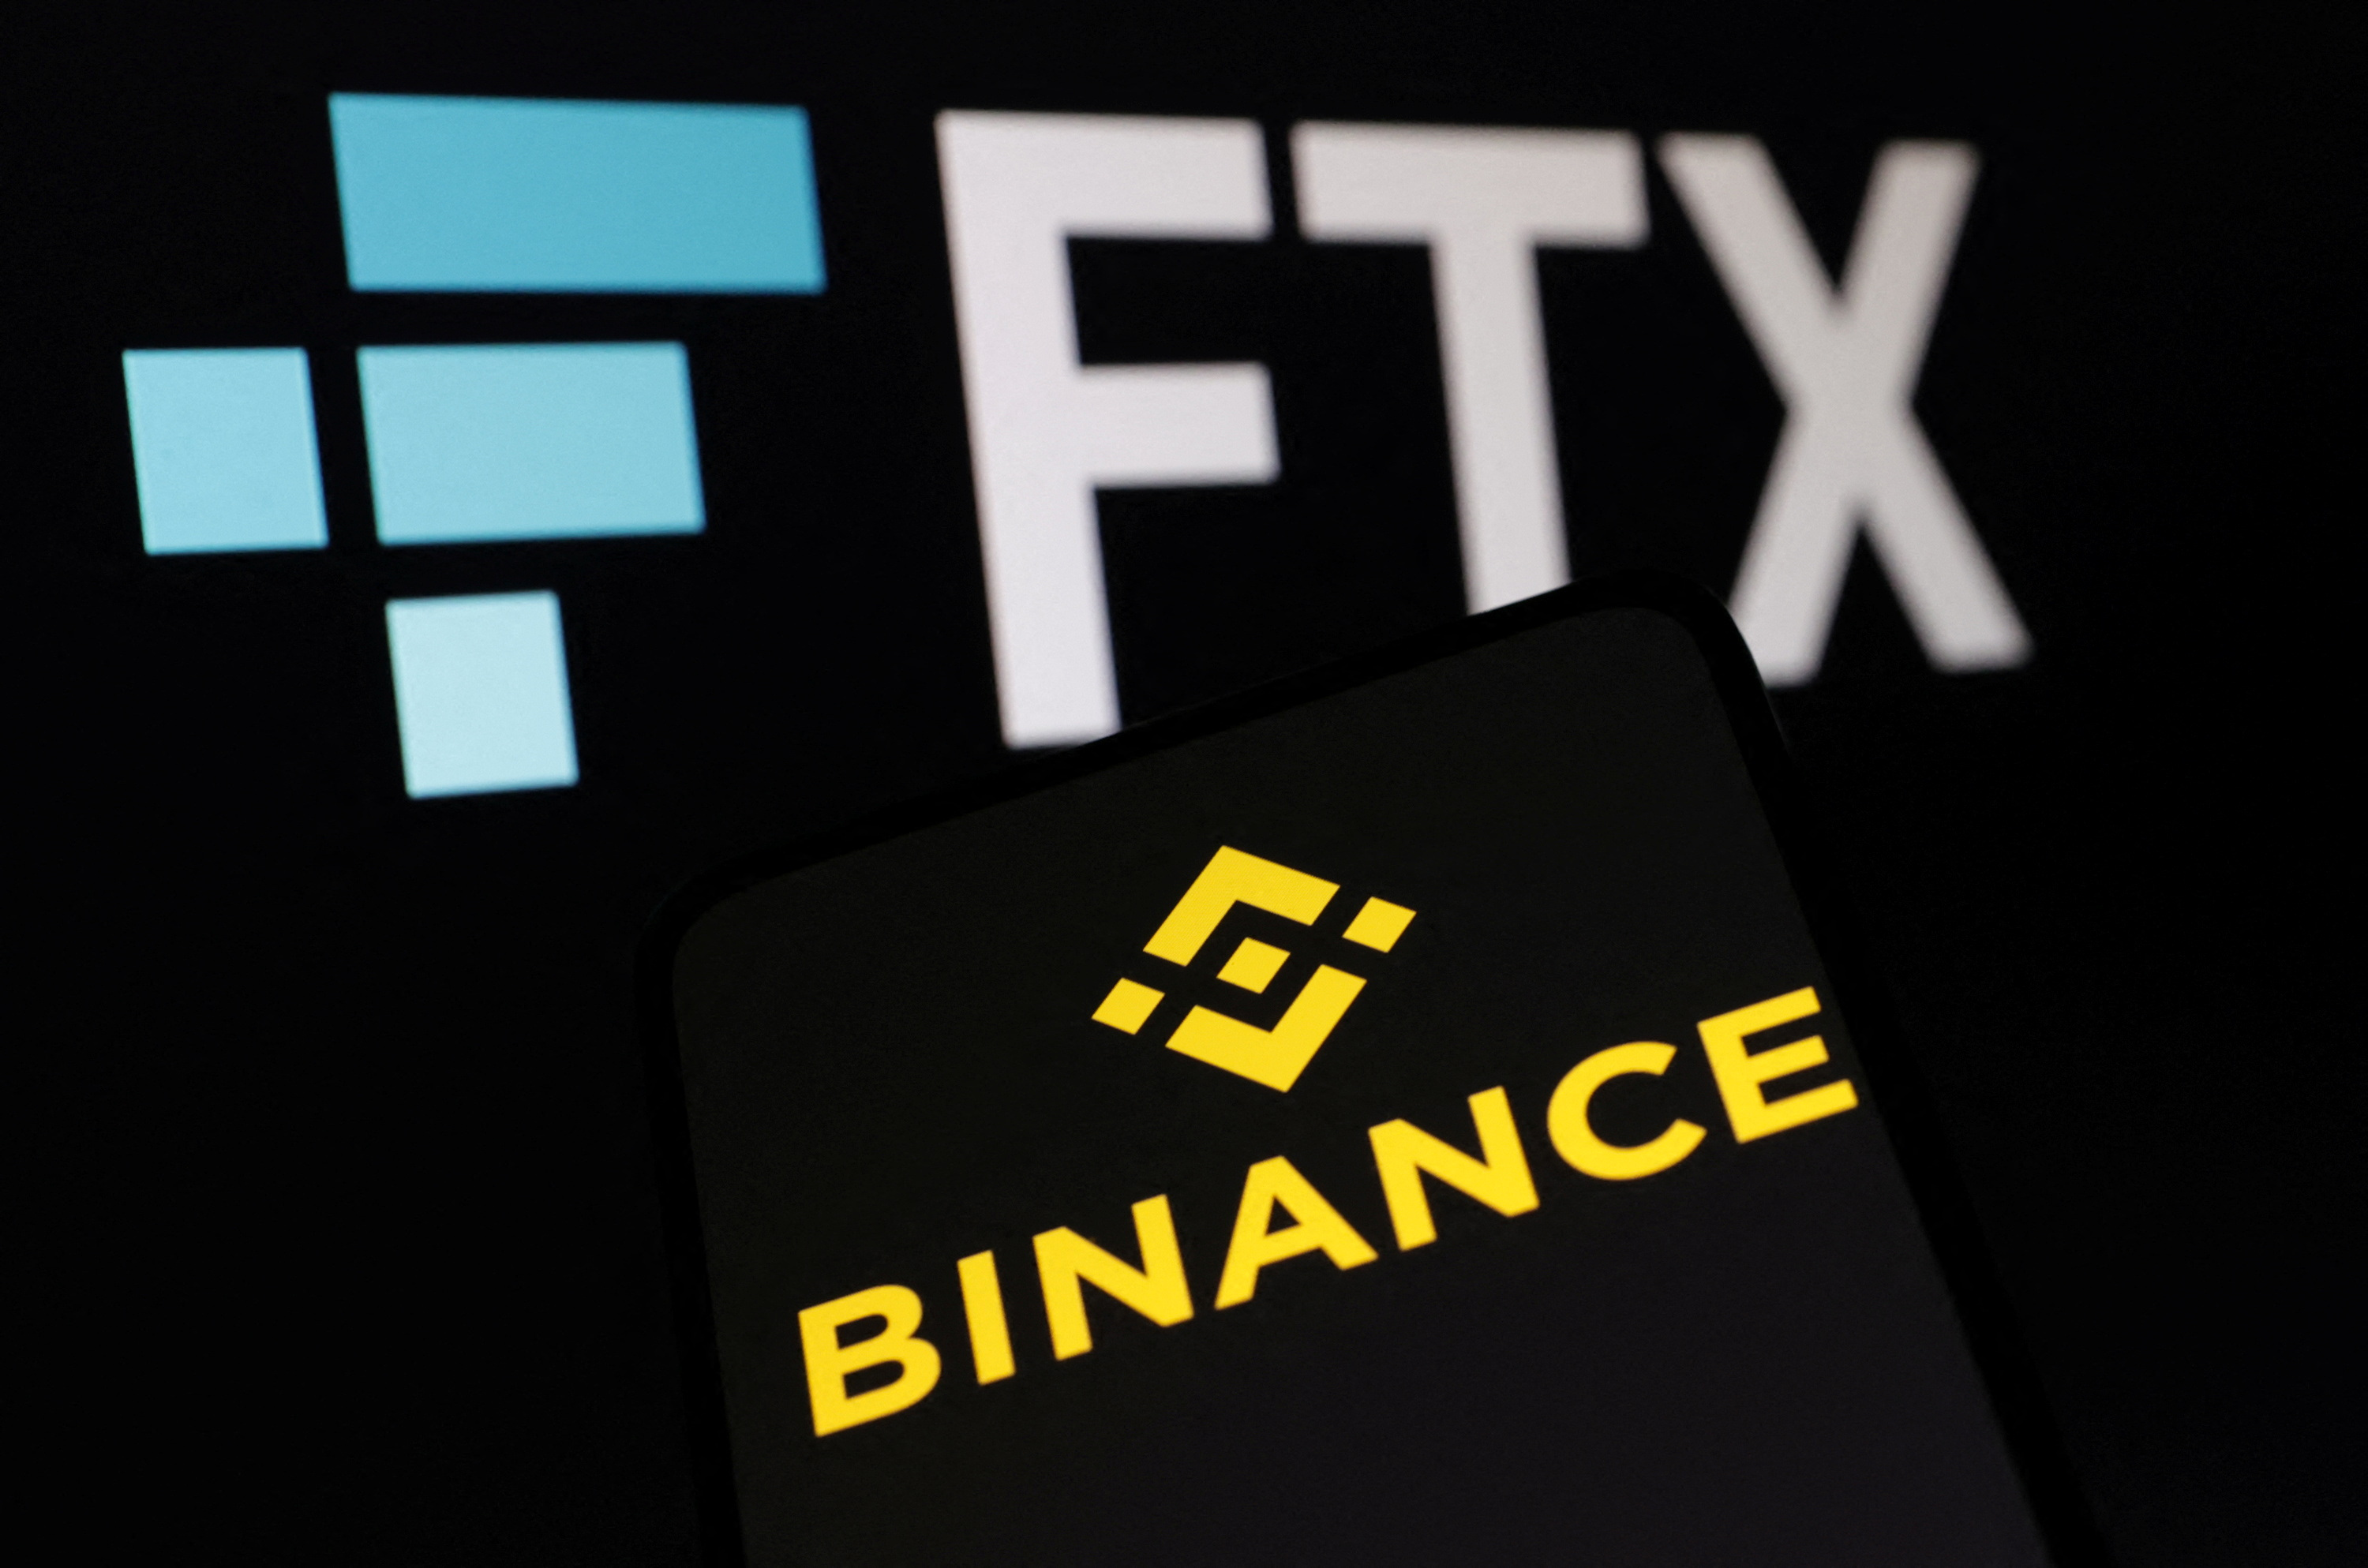 binance to purchase ftx